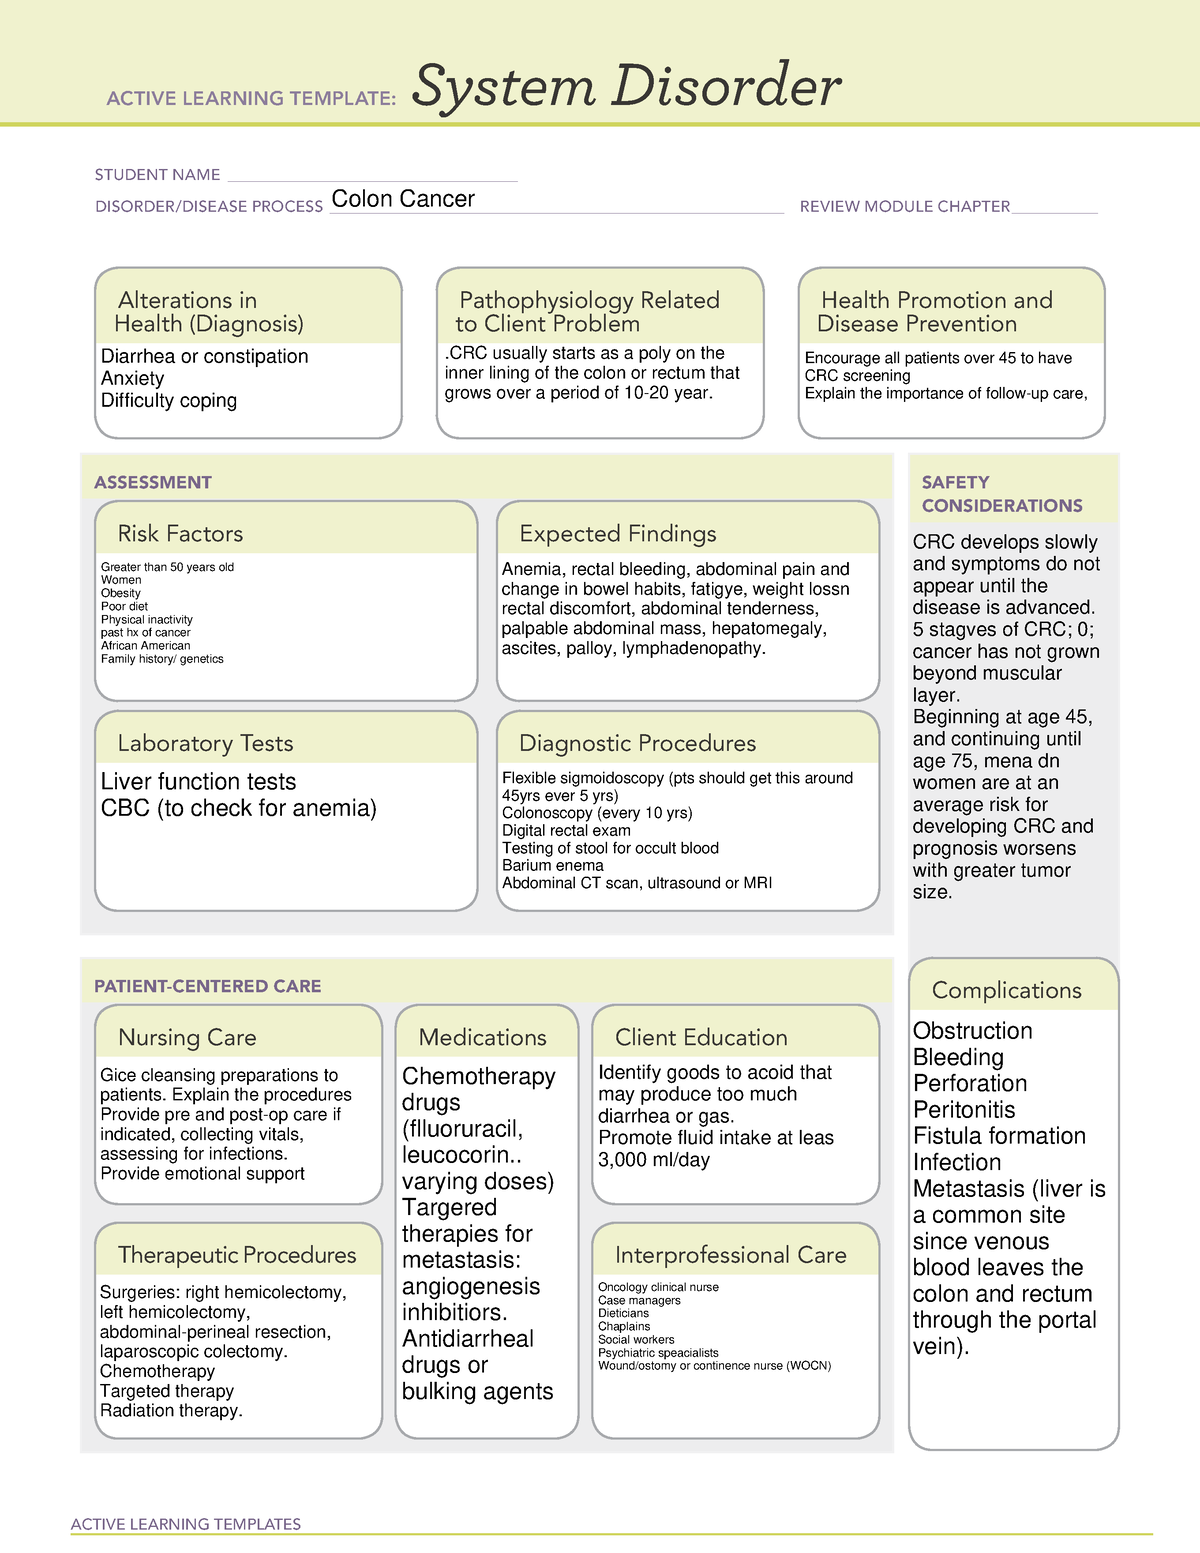 System Disorder Colon Cancer - ACTIVE LEARNING TEMPLATES System ...